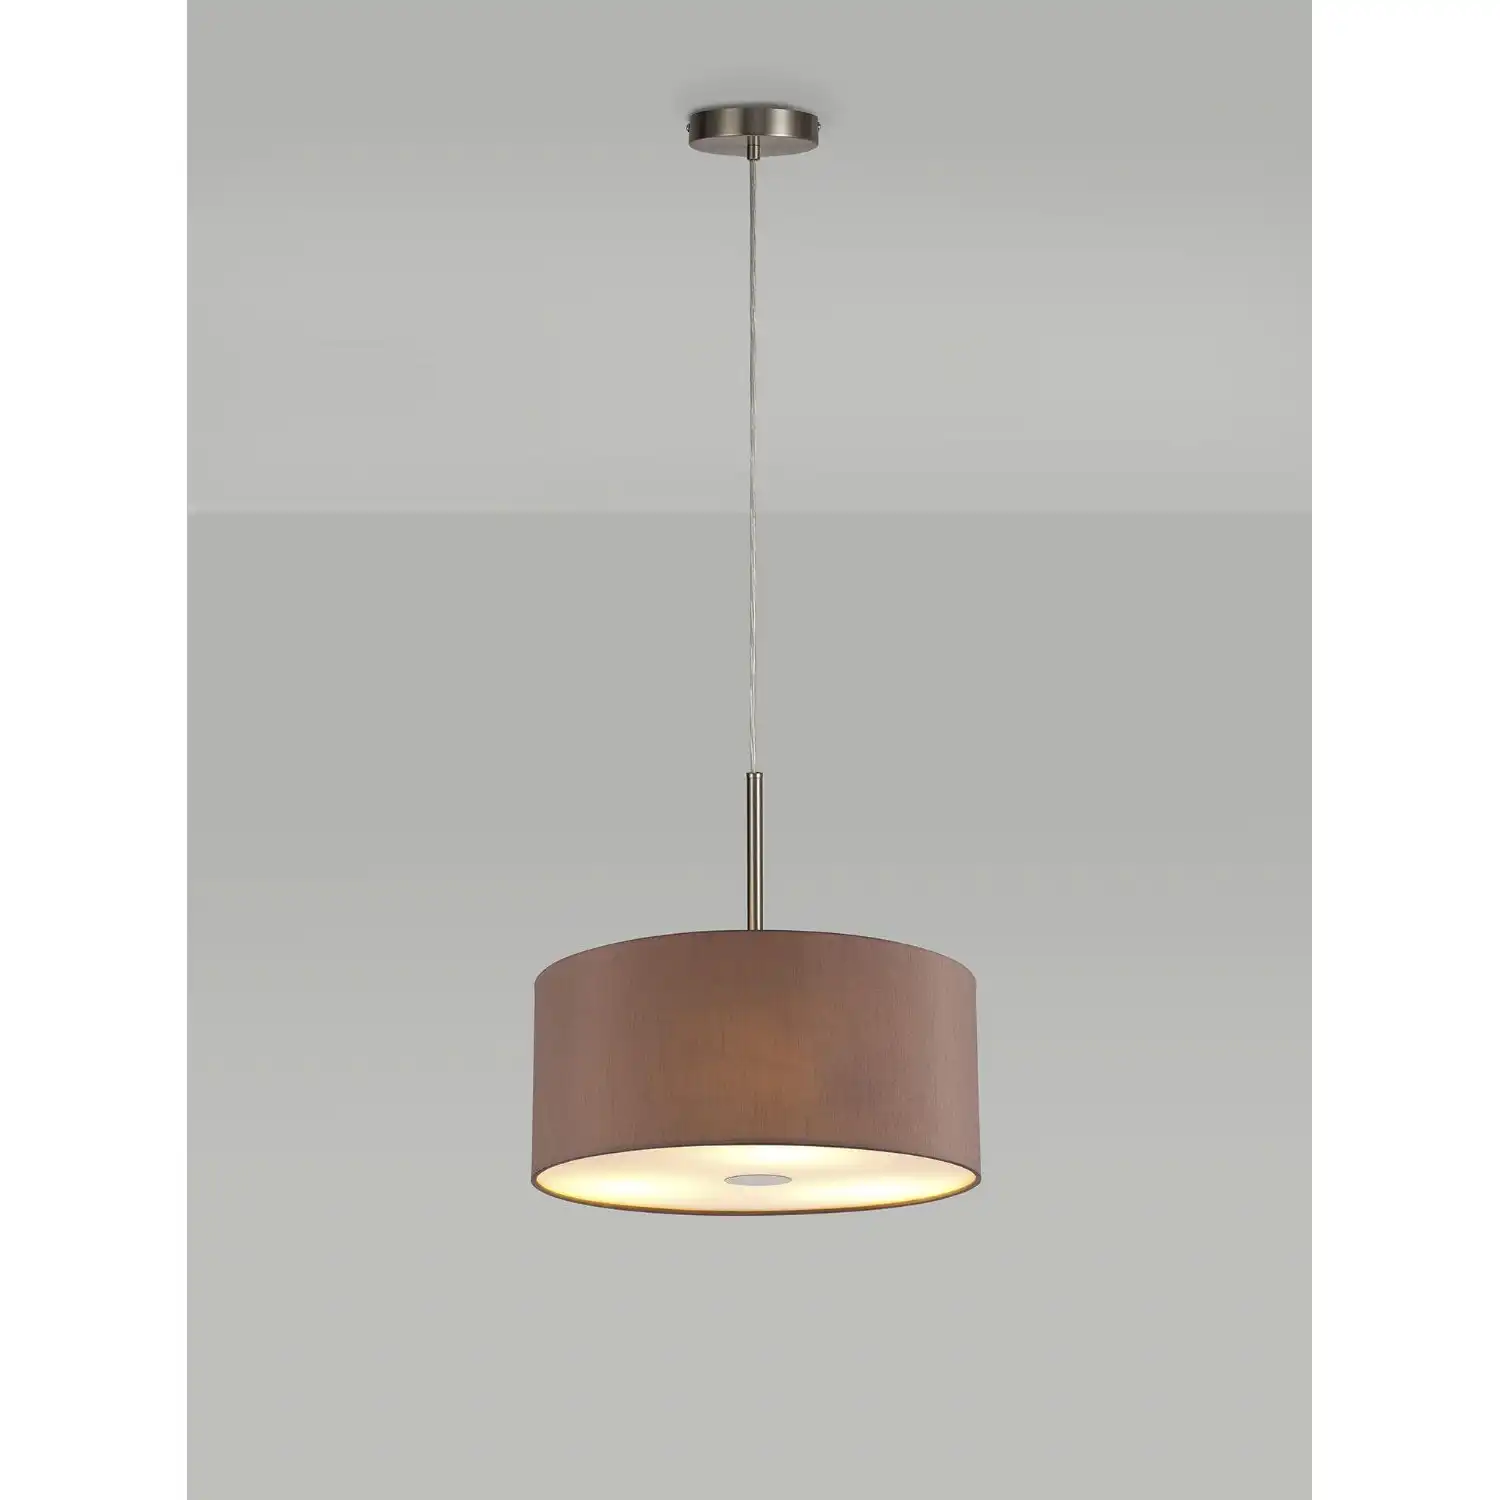 Baymont Satin Nickel 3m 5 Light E27 Single Pendant c w 400mm Dual Faux Silk Shade, Taupe Halo Gold And 400mm Frosted SN Acrylic Diffuser